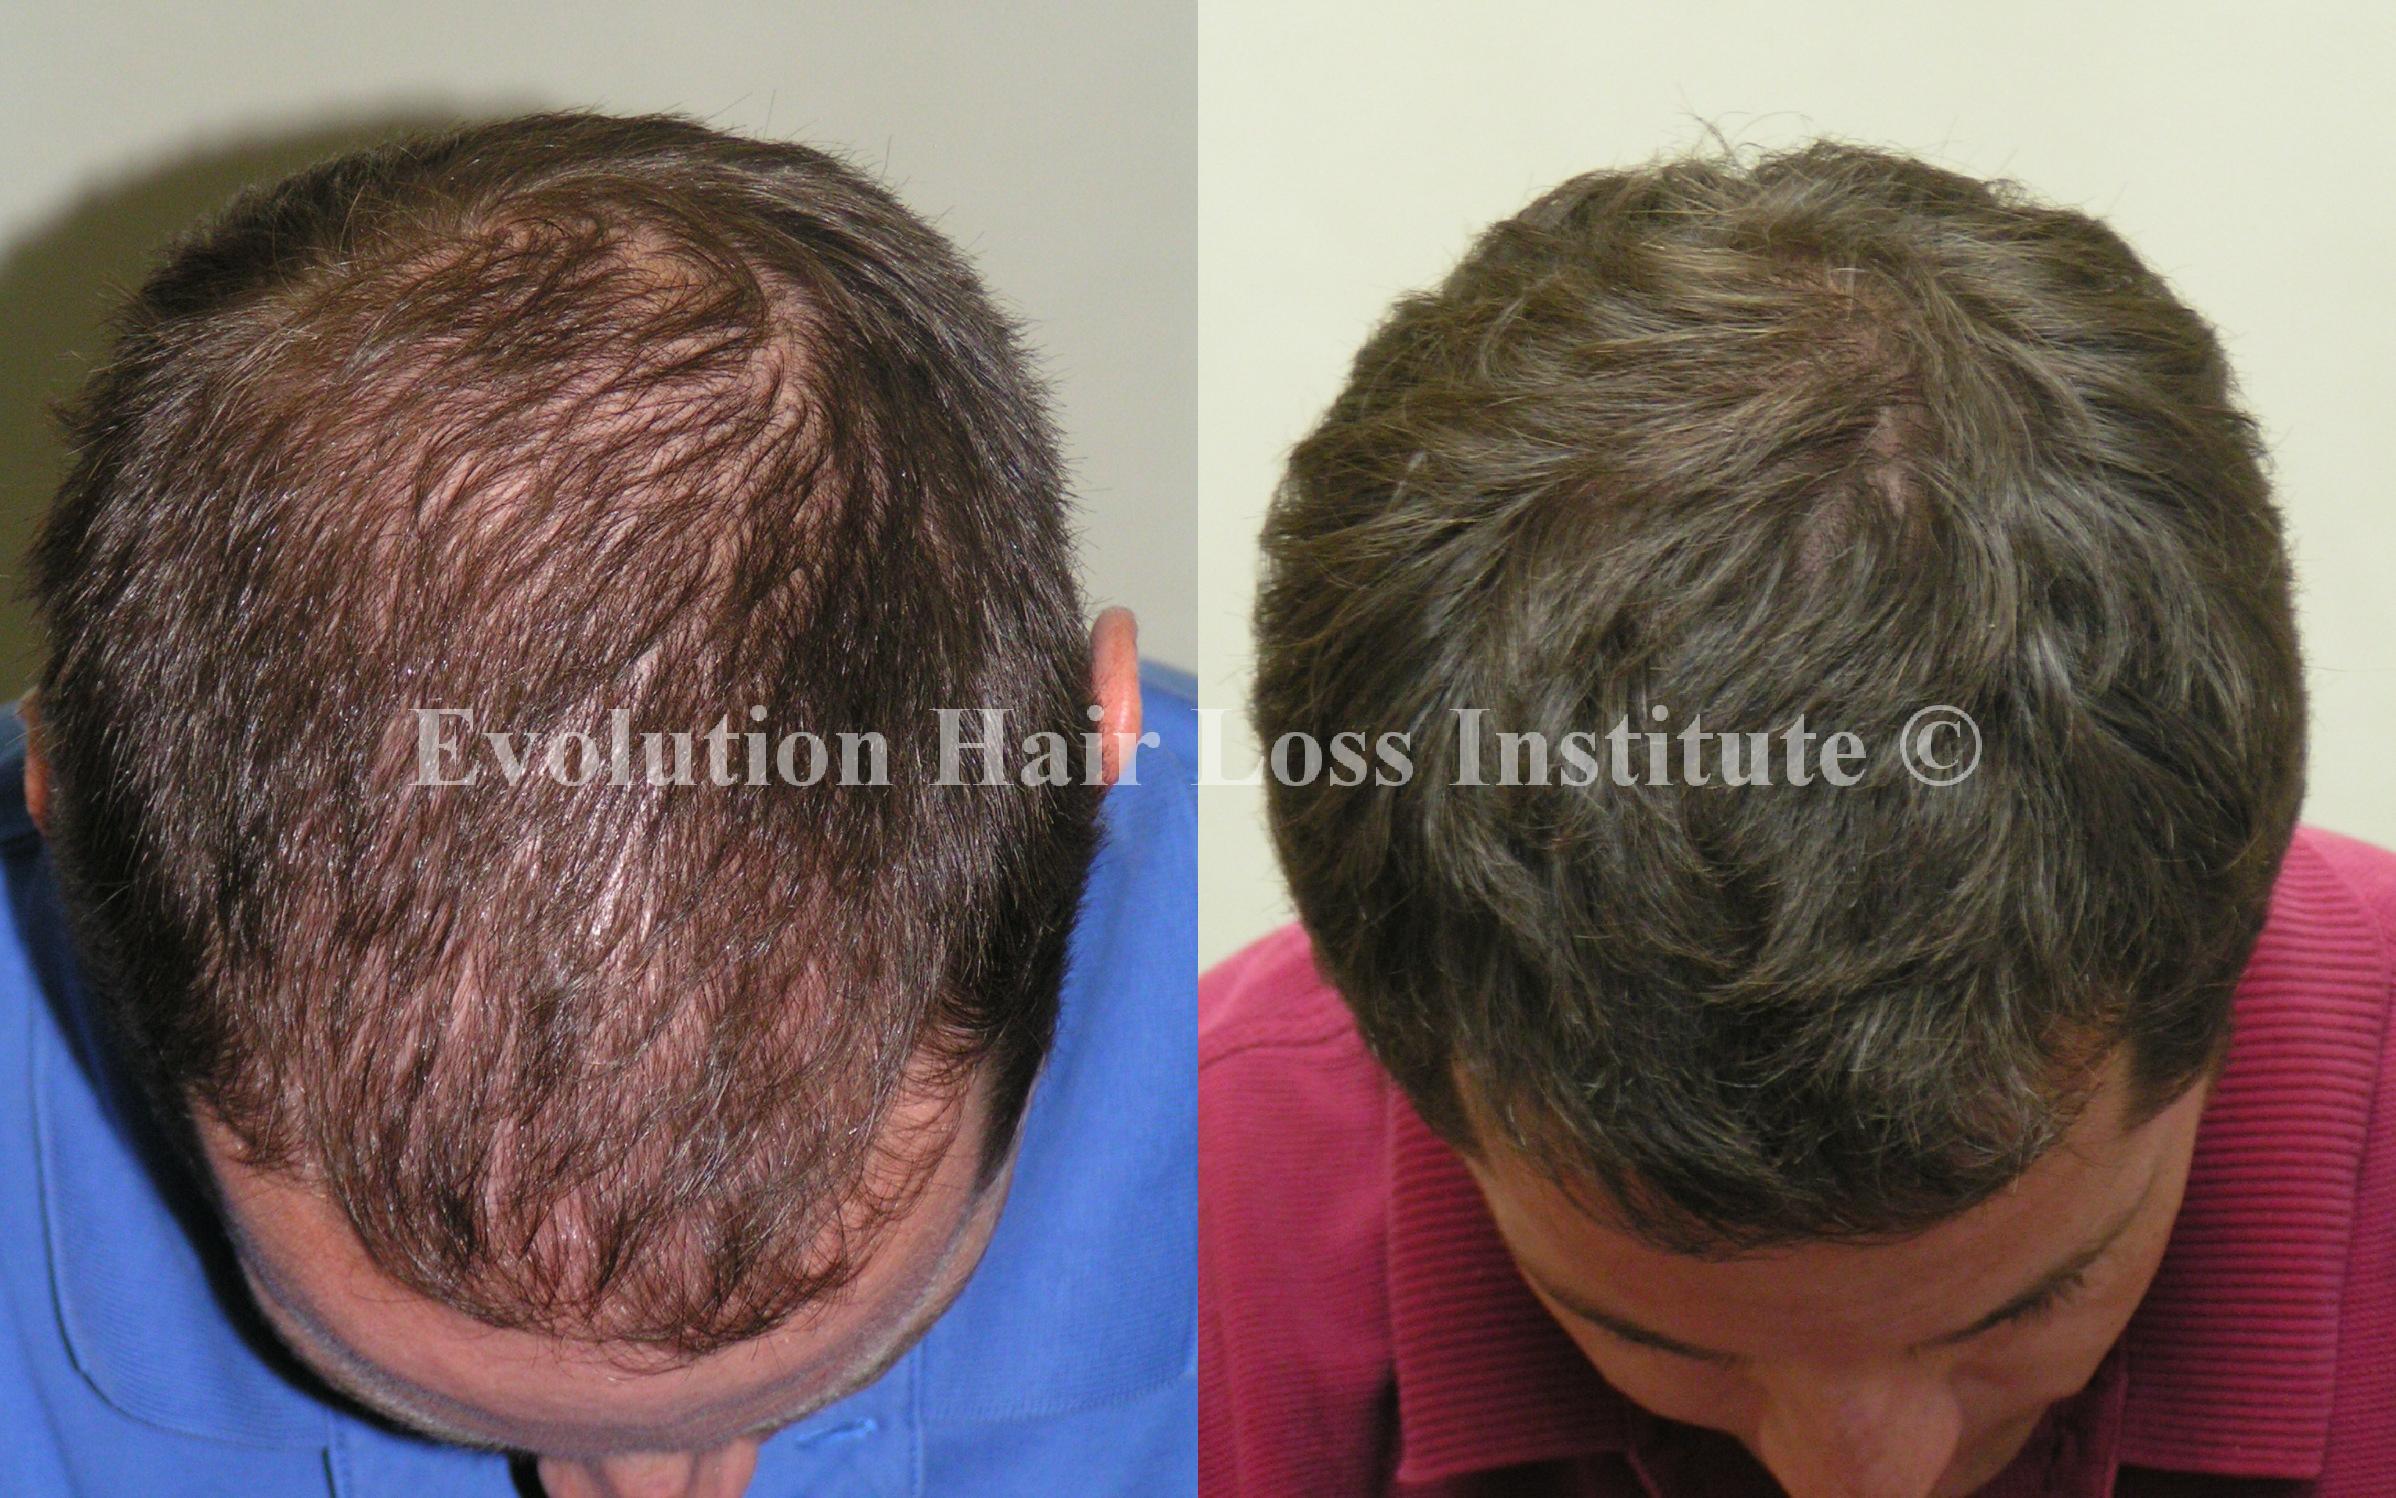 Before And After Hair Growth Treatment Photos